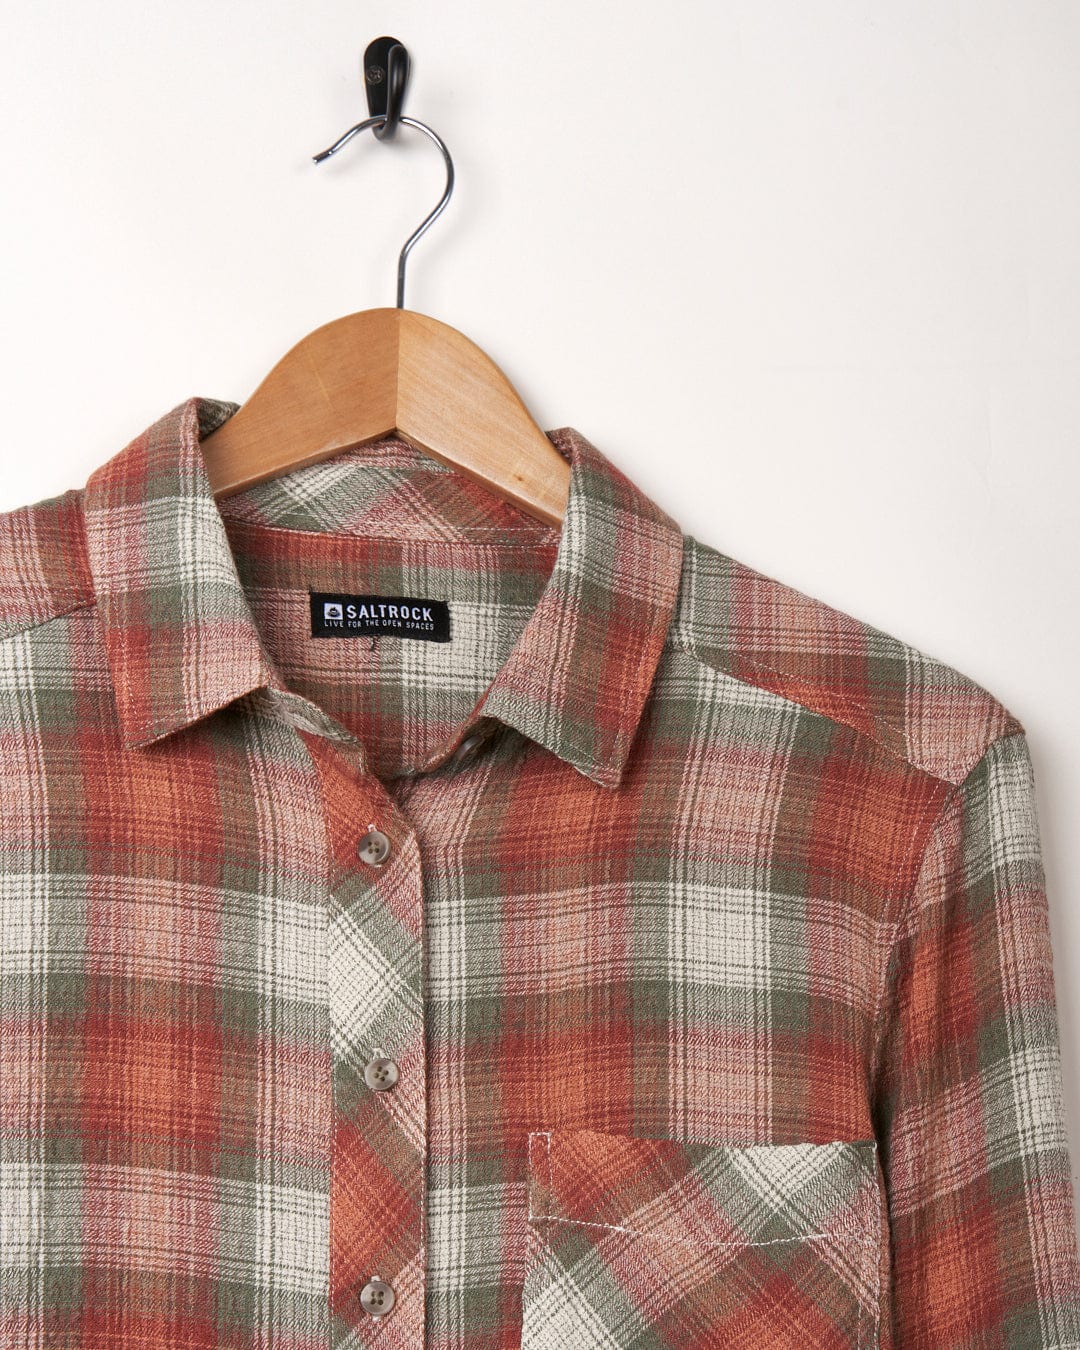 Longline Rosalin shirt by Saltrock on a wooden hanger against a white background.